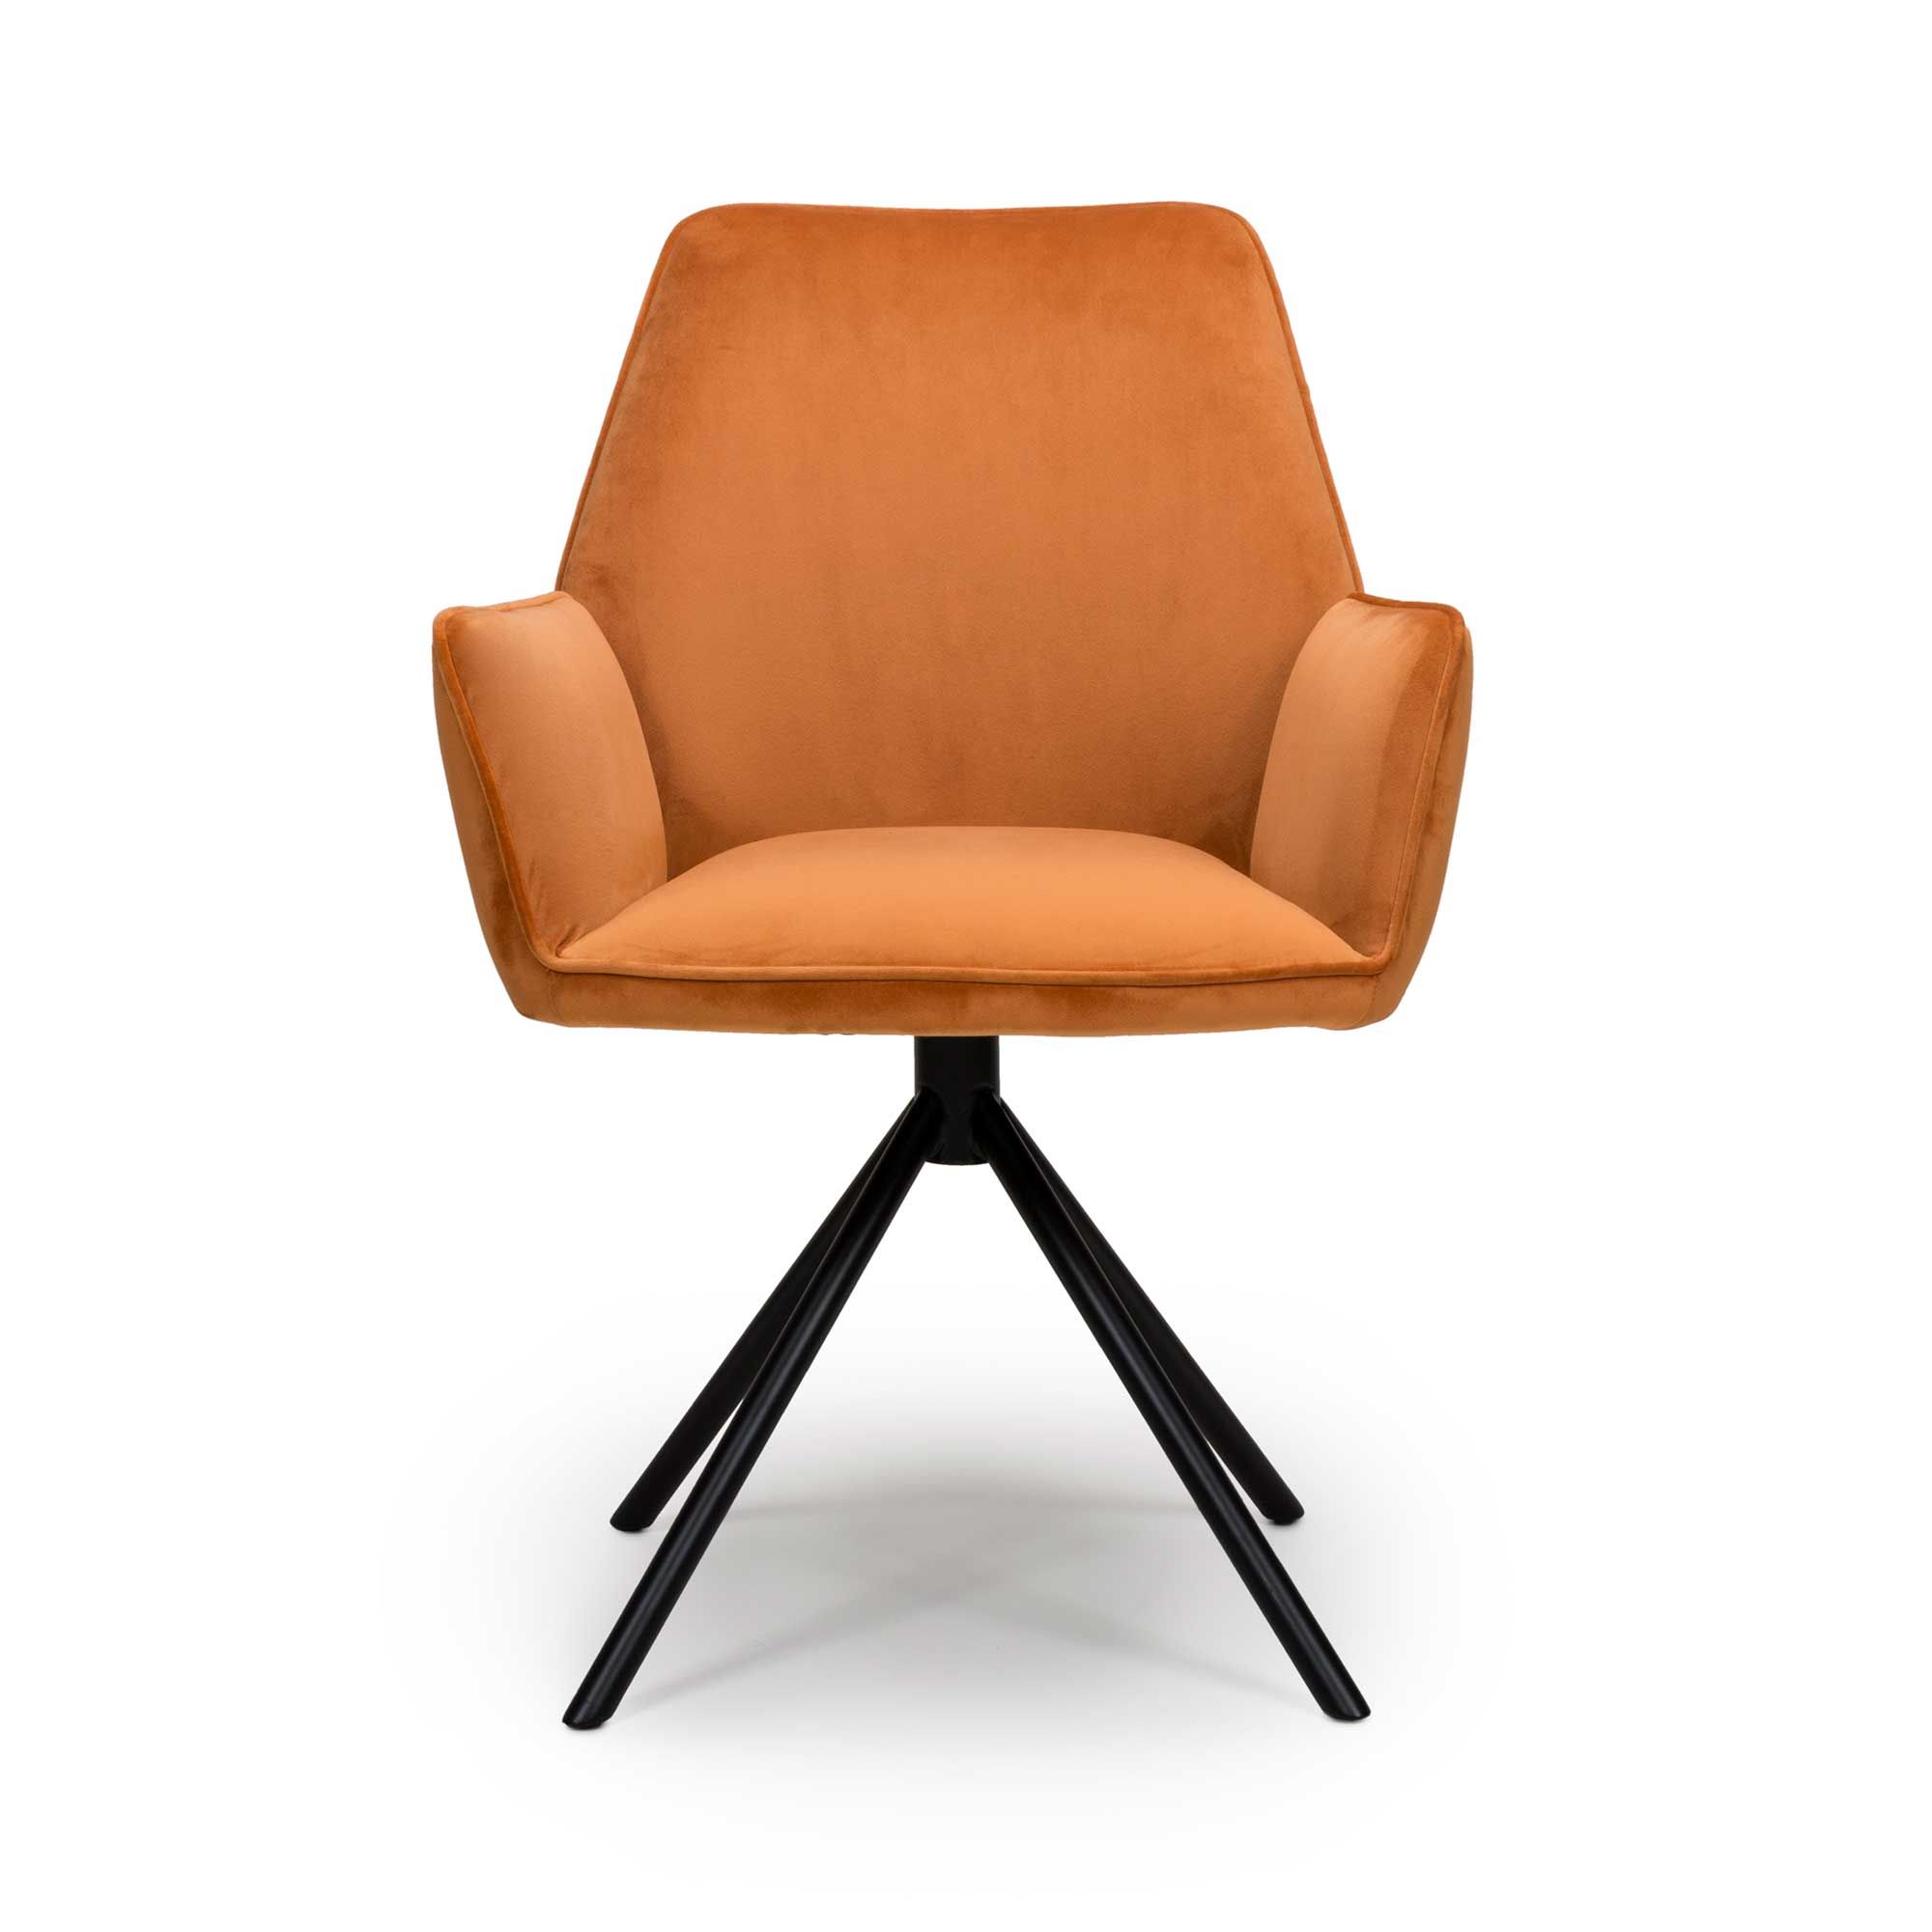 Uno Dining Chair Burnt Orange Meubles, Orange Leather Chairs Dining